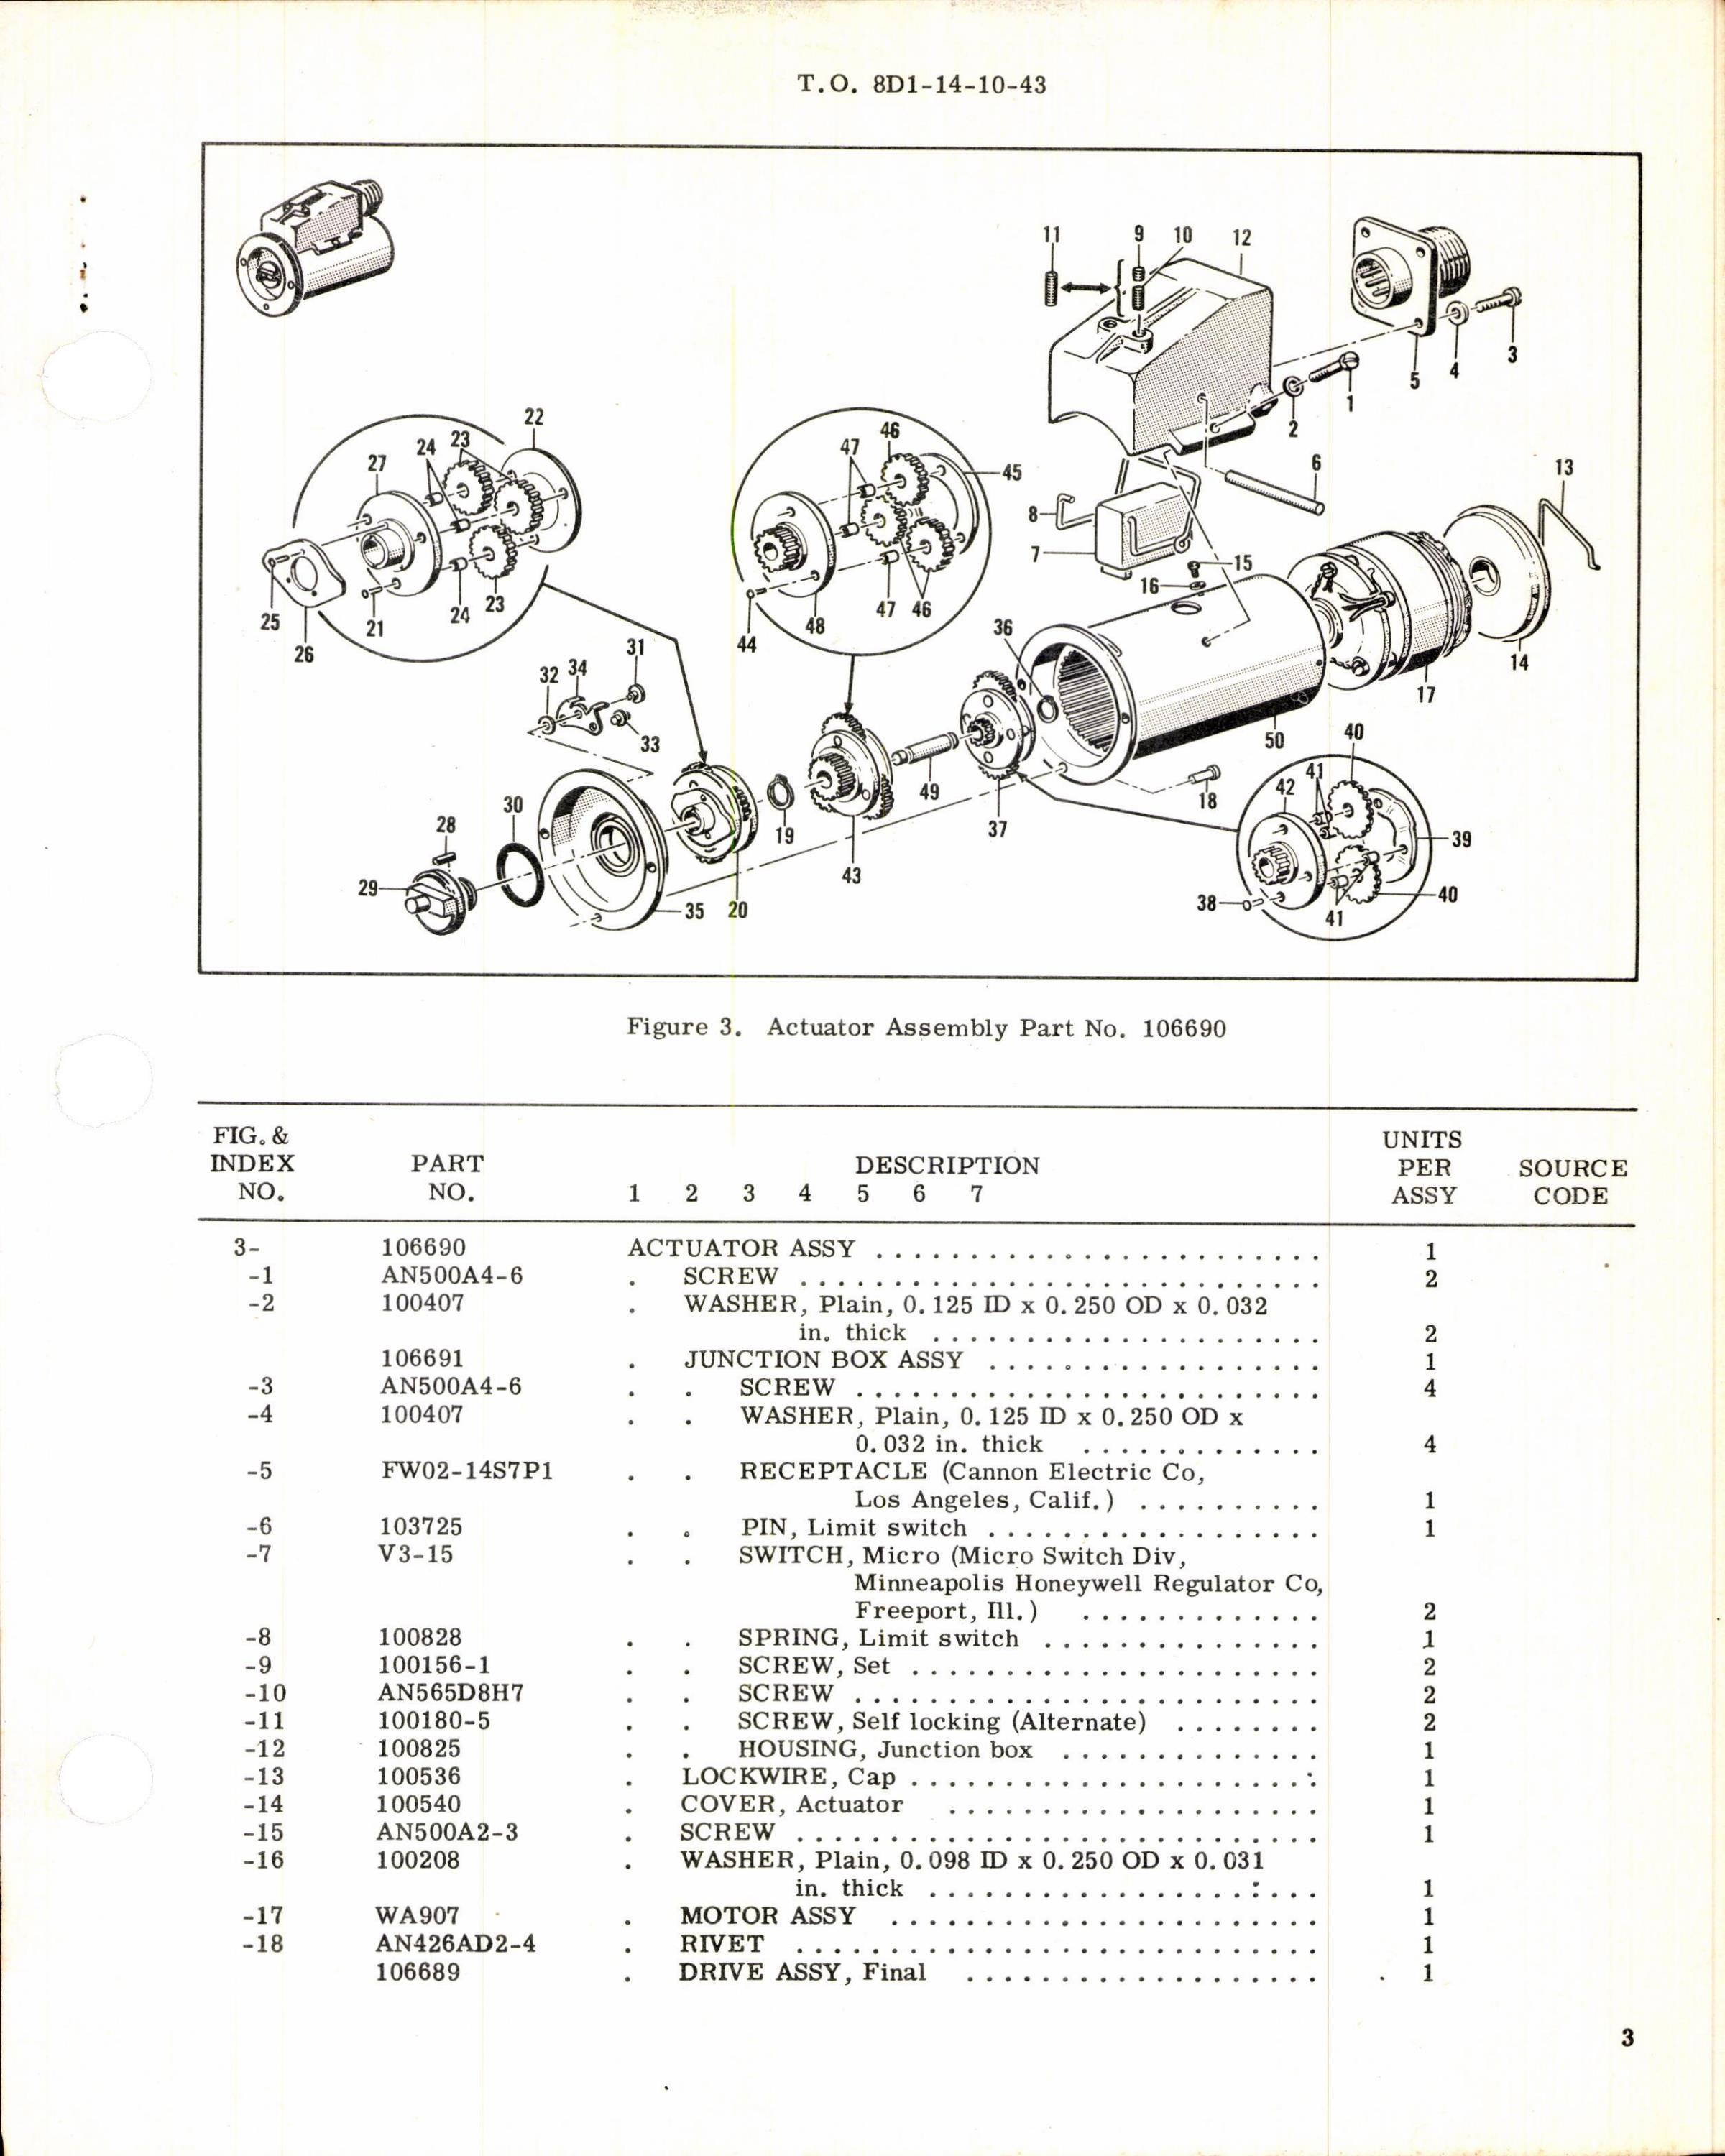 Sample page 3 from AirCorps Library document: Instructions w Parts Breakdown for Actuator Assembly Part 106690